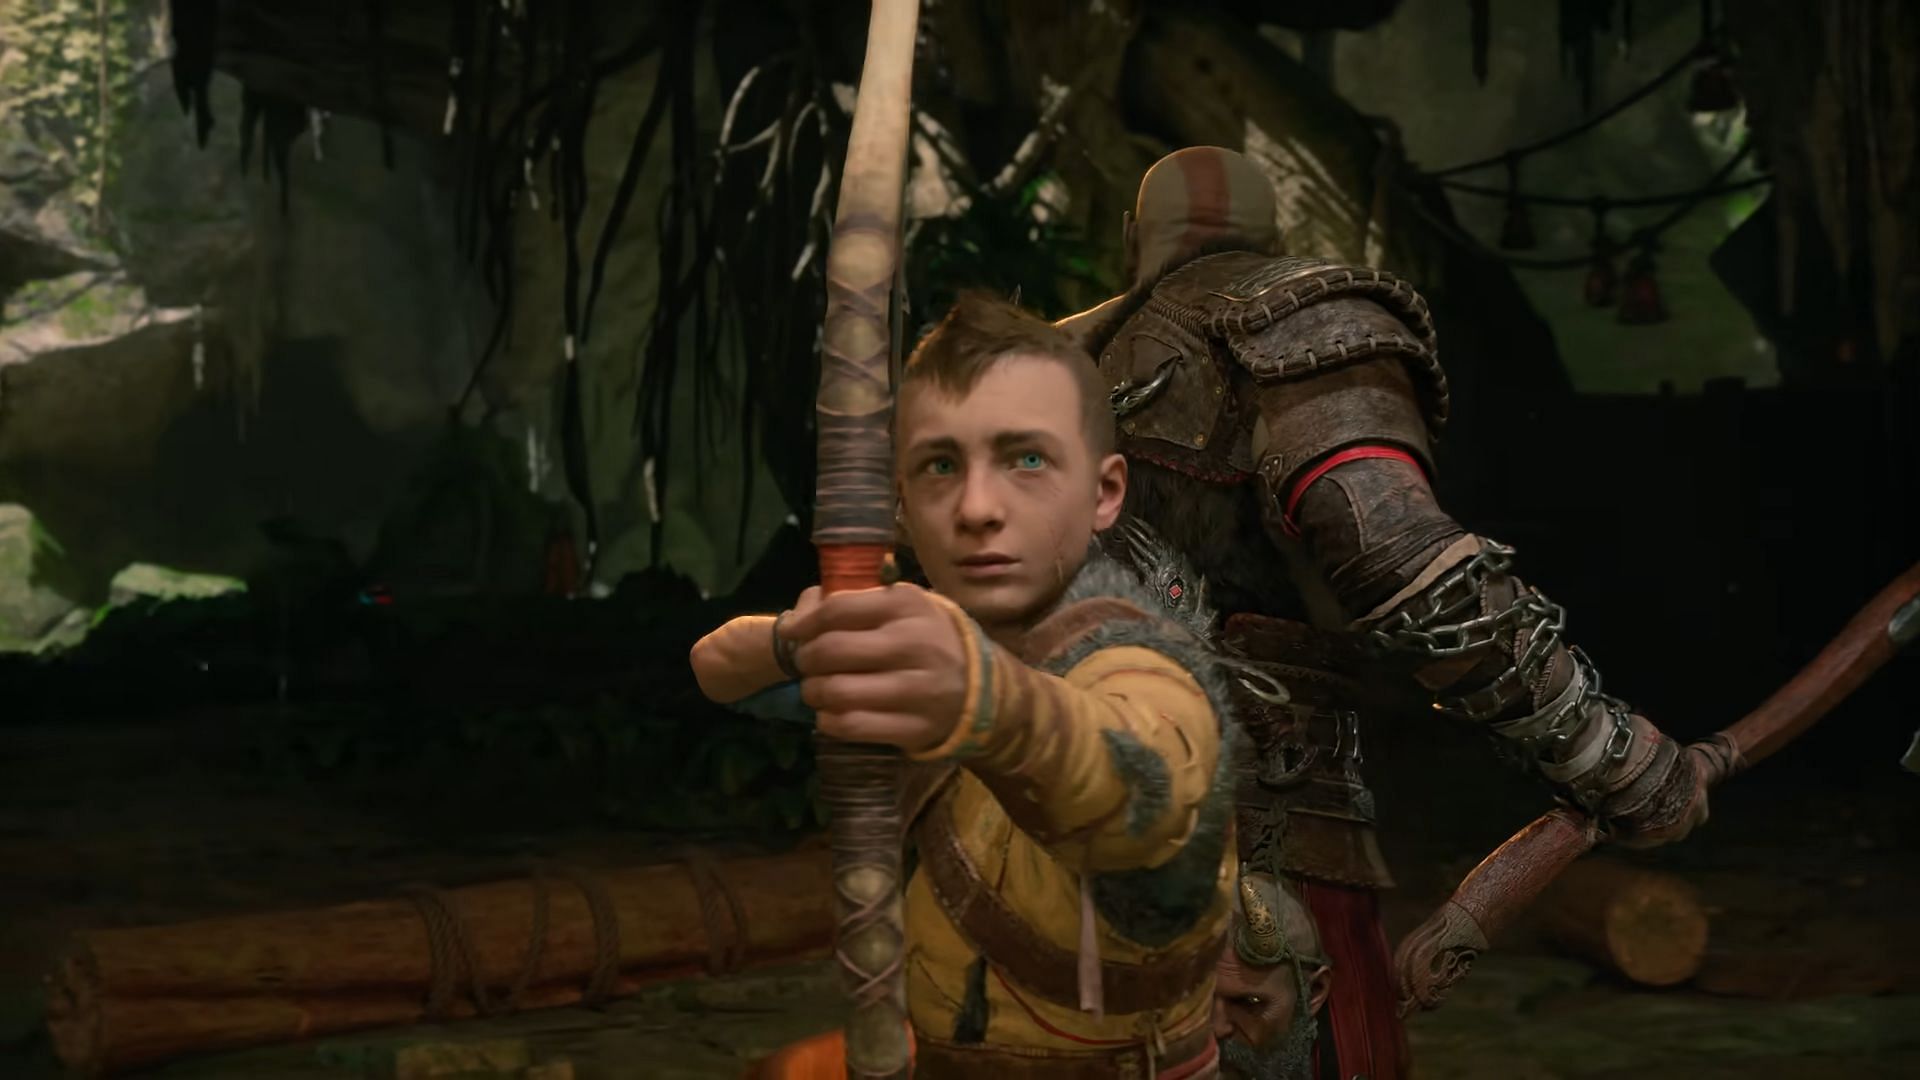 Kratos and Atreus must thwart Ragnarok together while defying fate (Image via Sony)